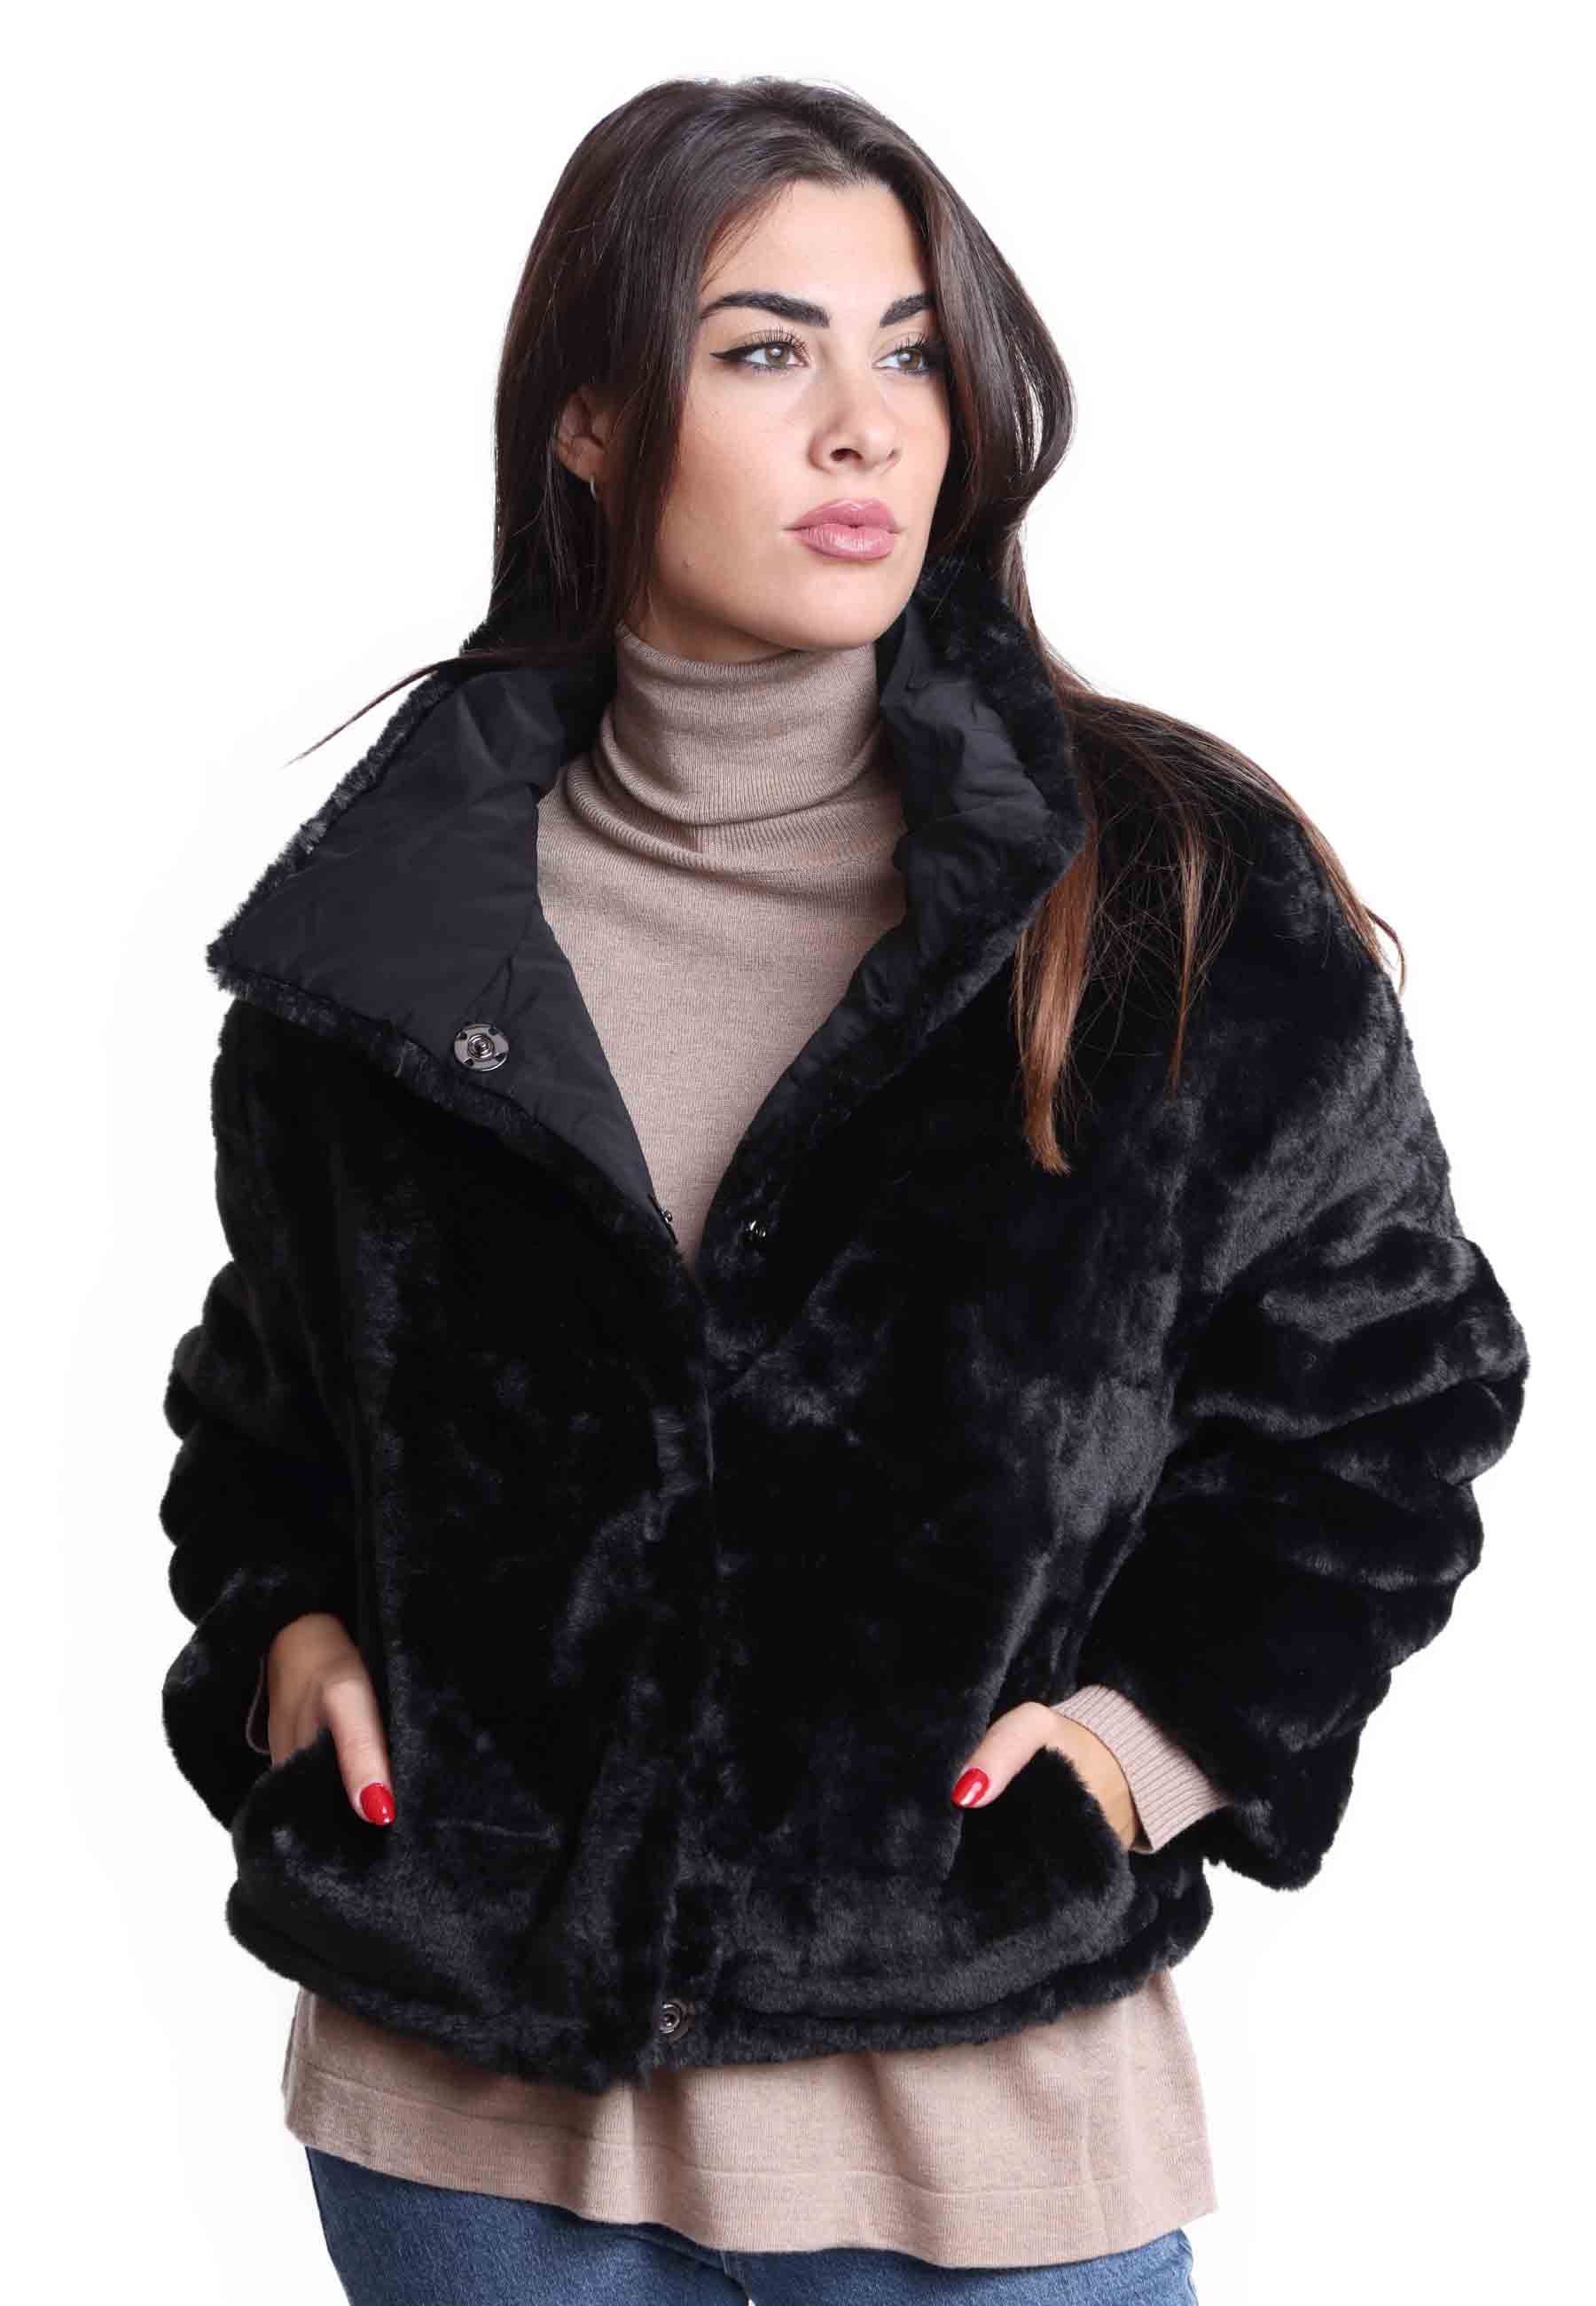 Reversible black eco fur women's jackets with high collar